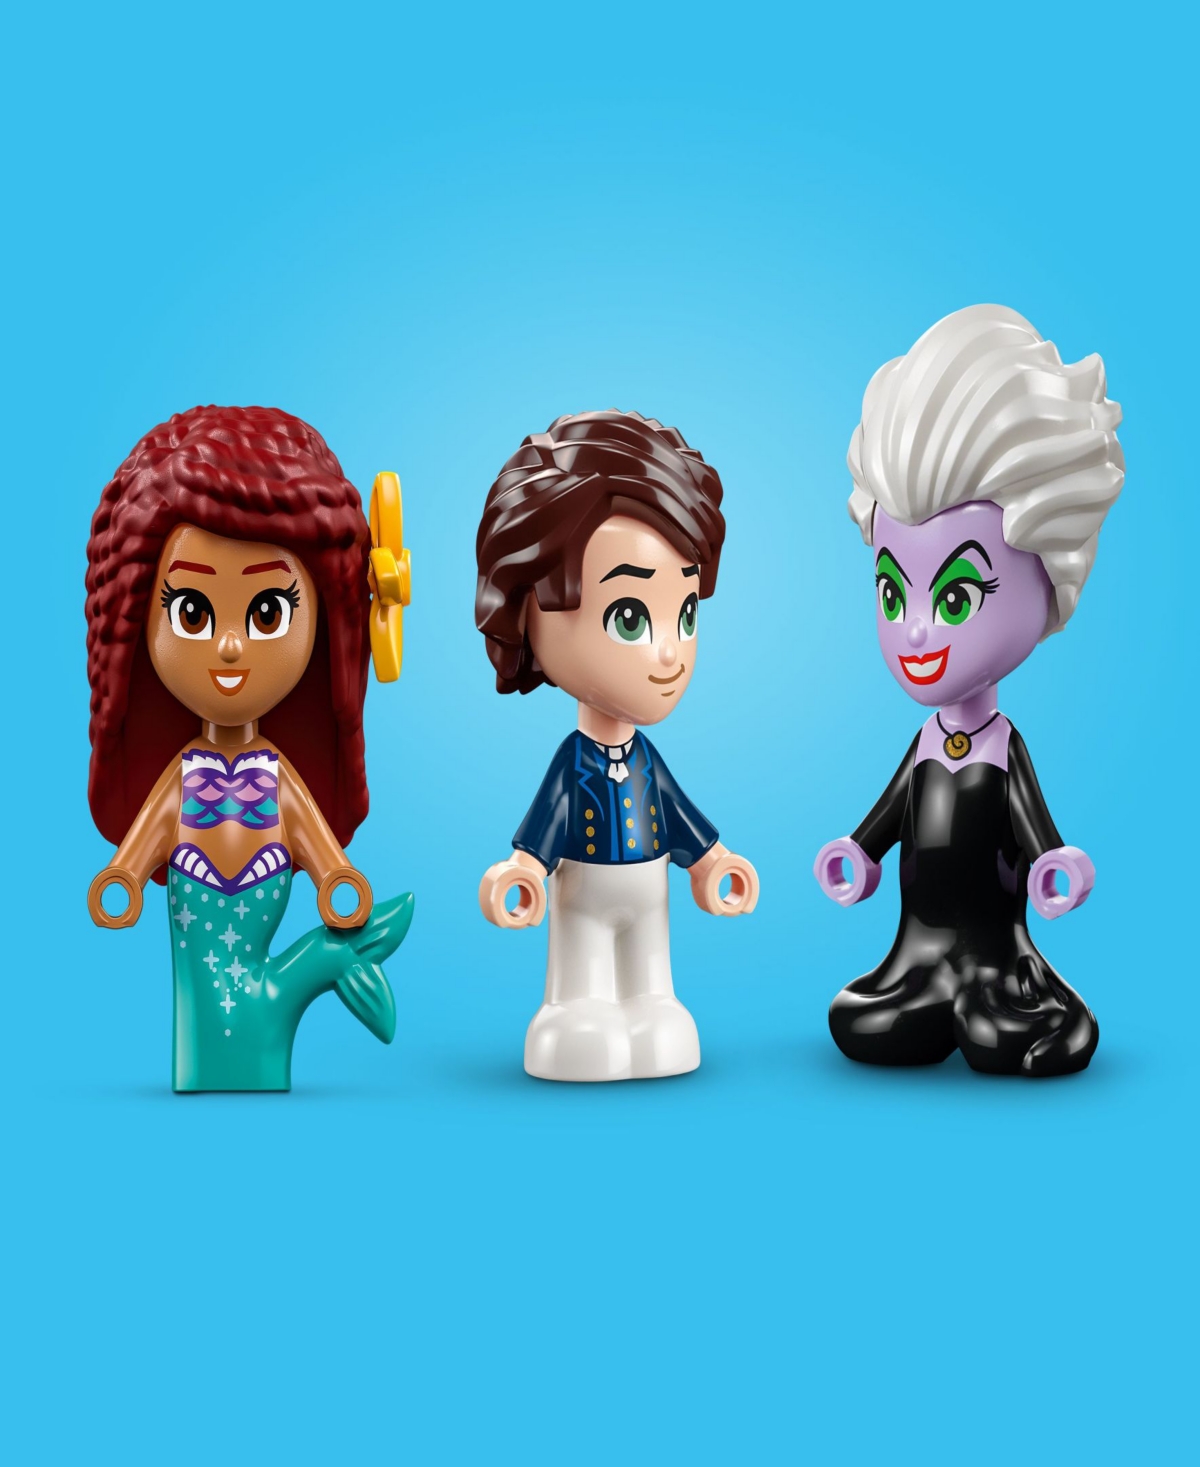 Shop Lego Disney 43213 Princess The Little Mermaid Story Book Toy Building Set With Ariel, Prince Eric, Ursula In Multicolor